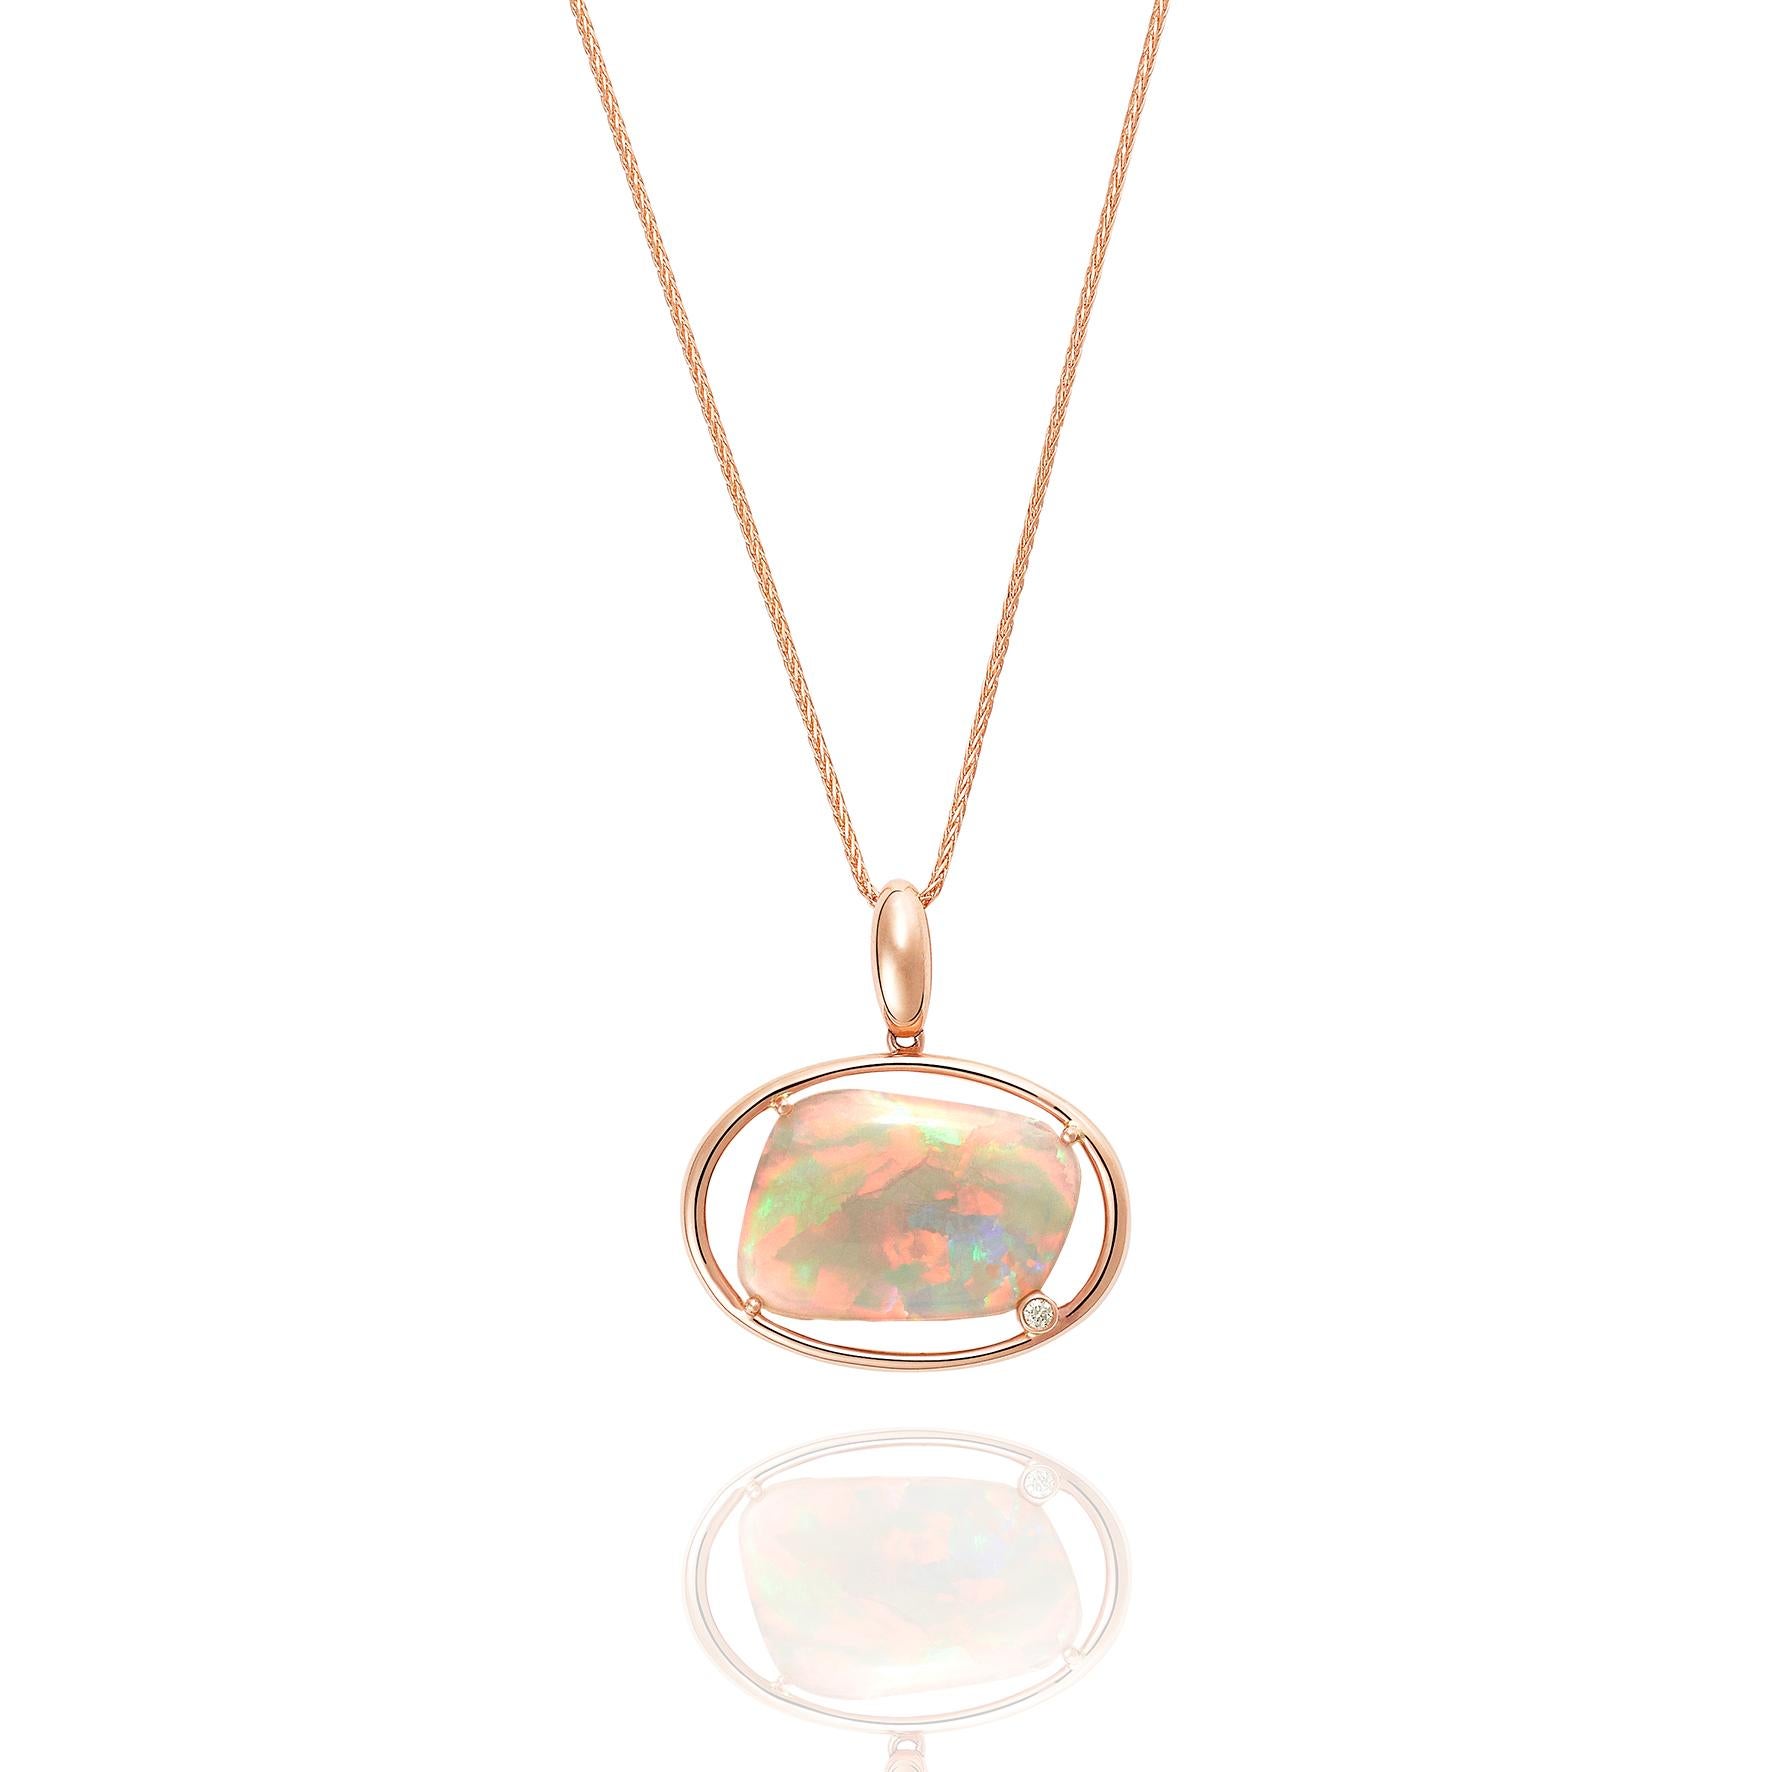 Giulians handcrafted 18 karat rose gold Australian White Opal and Diamond Pendant Necklace.  This contemporary pendant features a 4.14ct natural solid crystal opal with light color and bright pastel fire.  The opal is set in 4 prongs within an 18